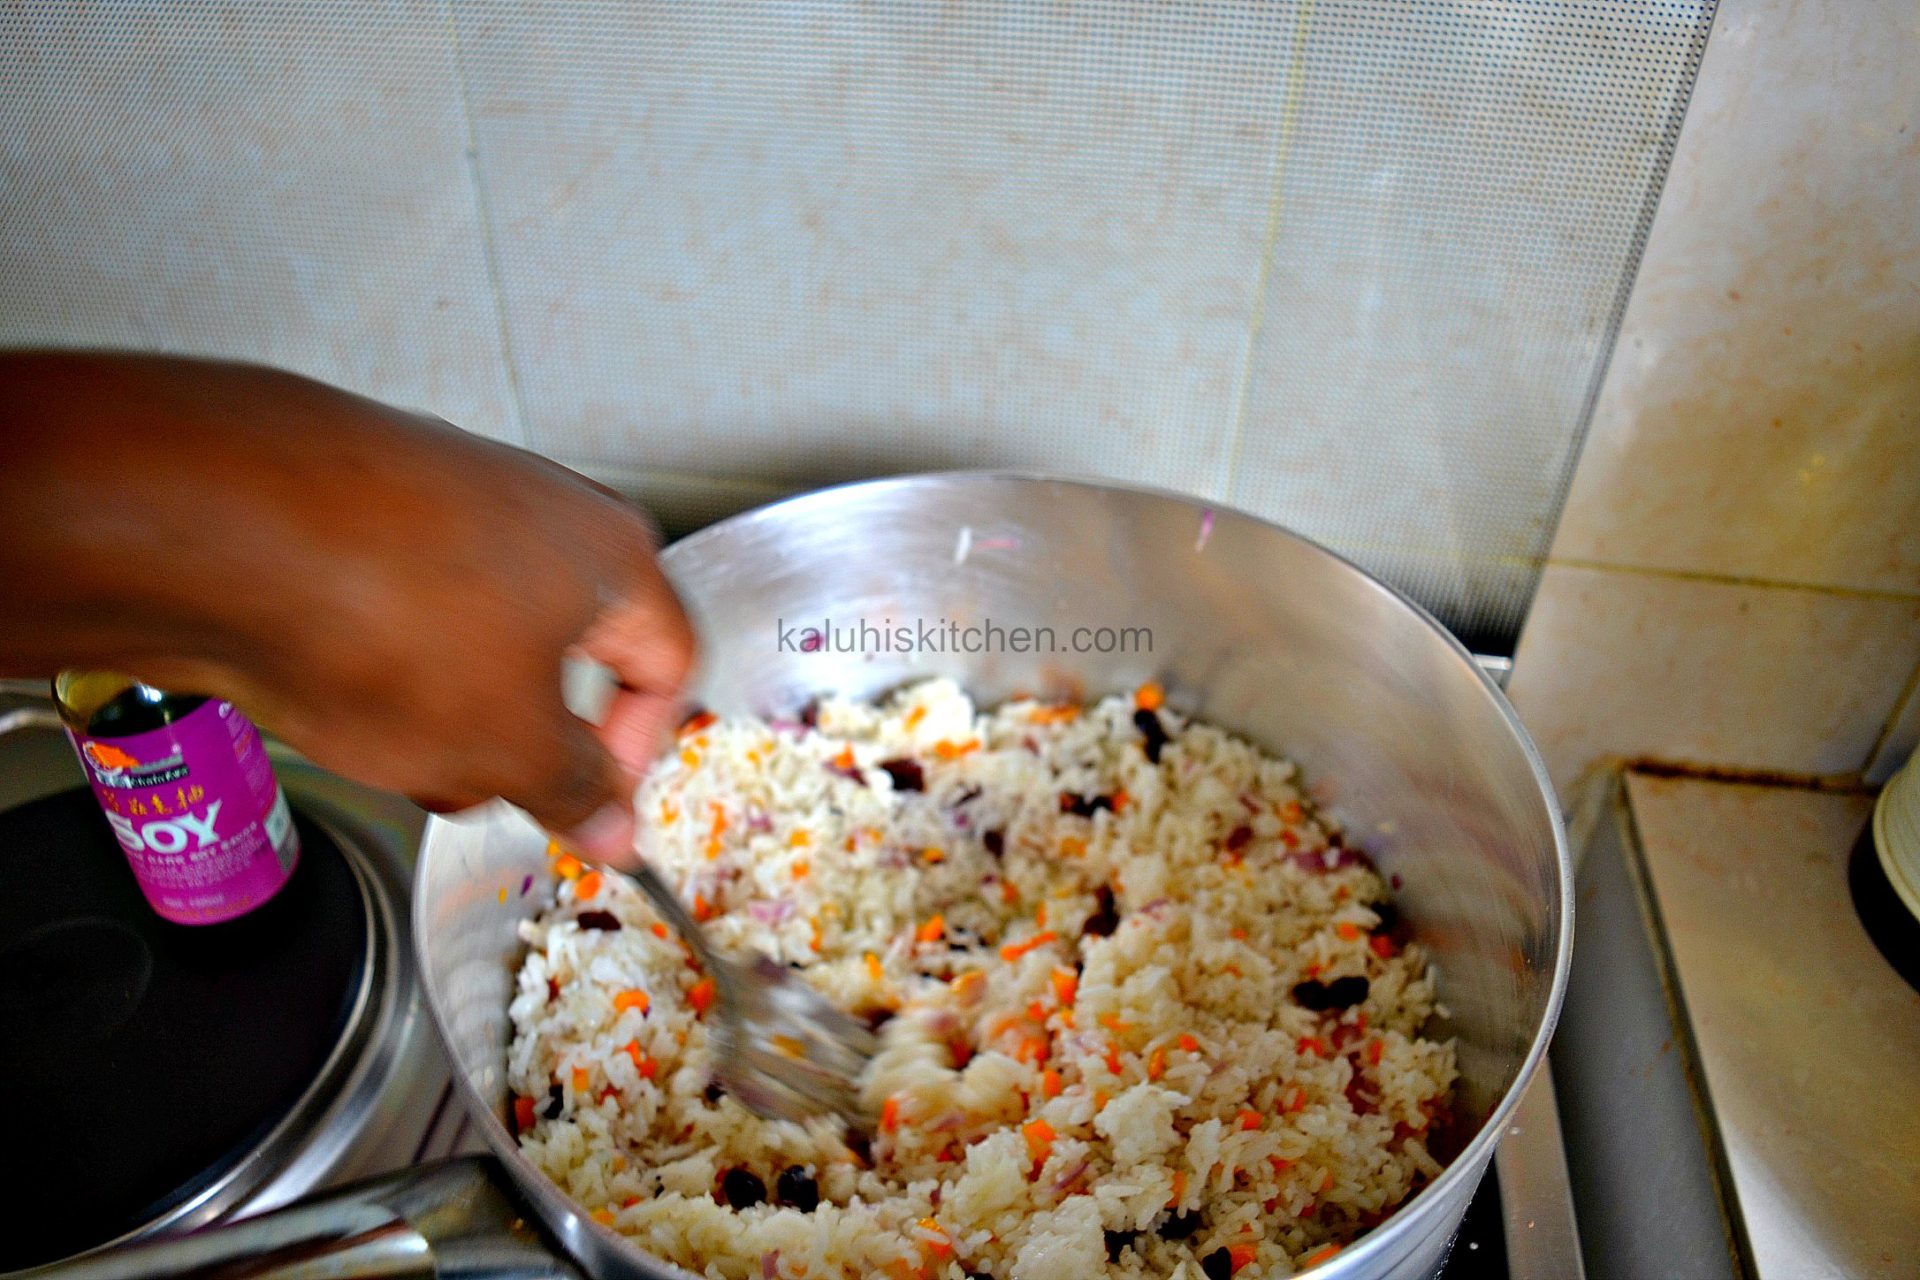 To prevent your carrot and raisin fried rice from sticking together, mix all ingredients togetherwith a fork, lightly but thoroughly_kaluhiskitchen.com